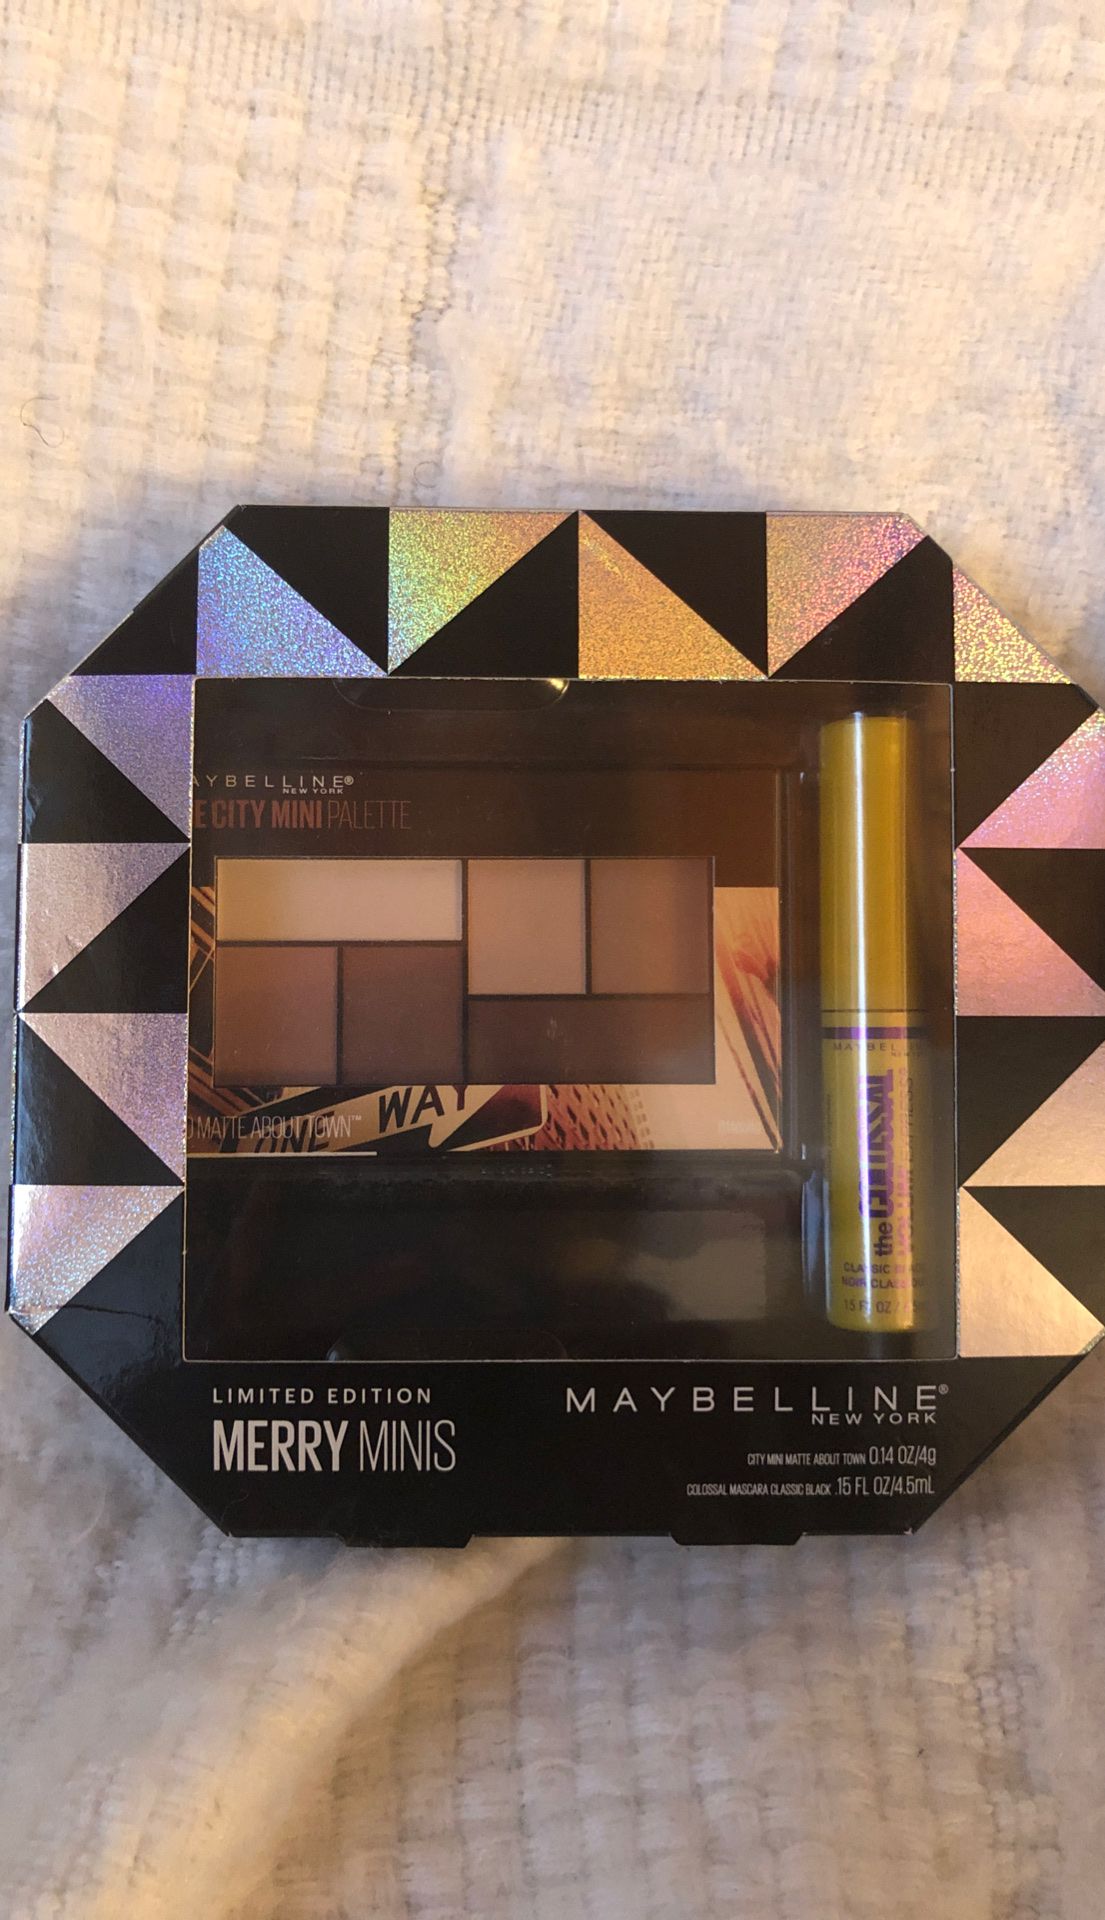 Limited Edition Maybelline New York Merry Minis